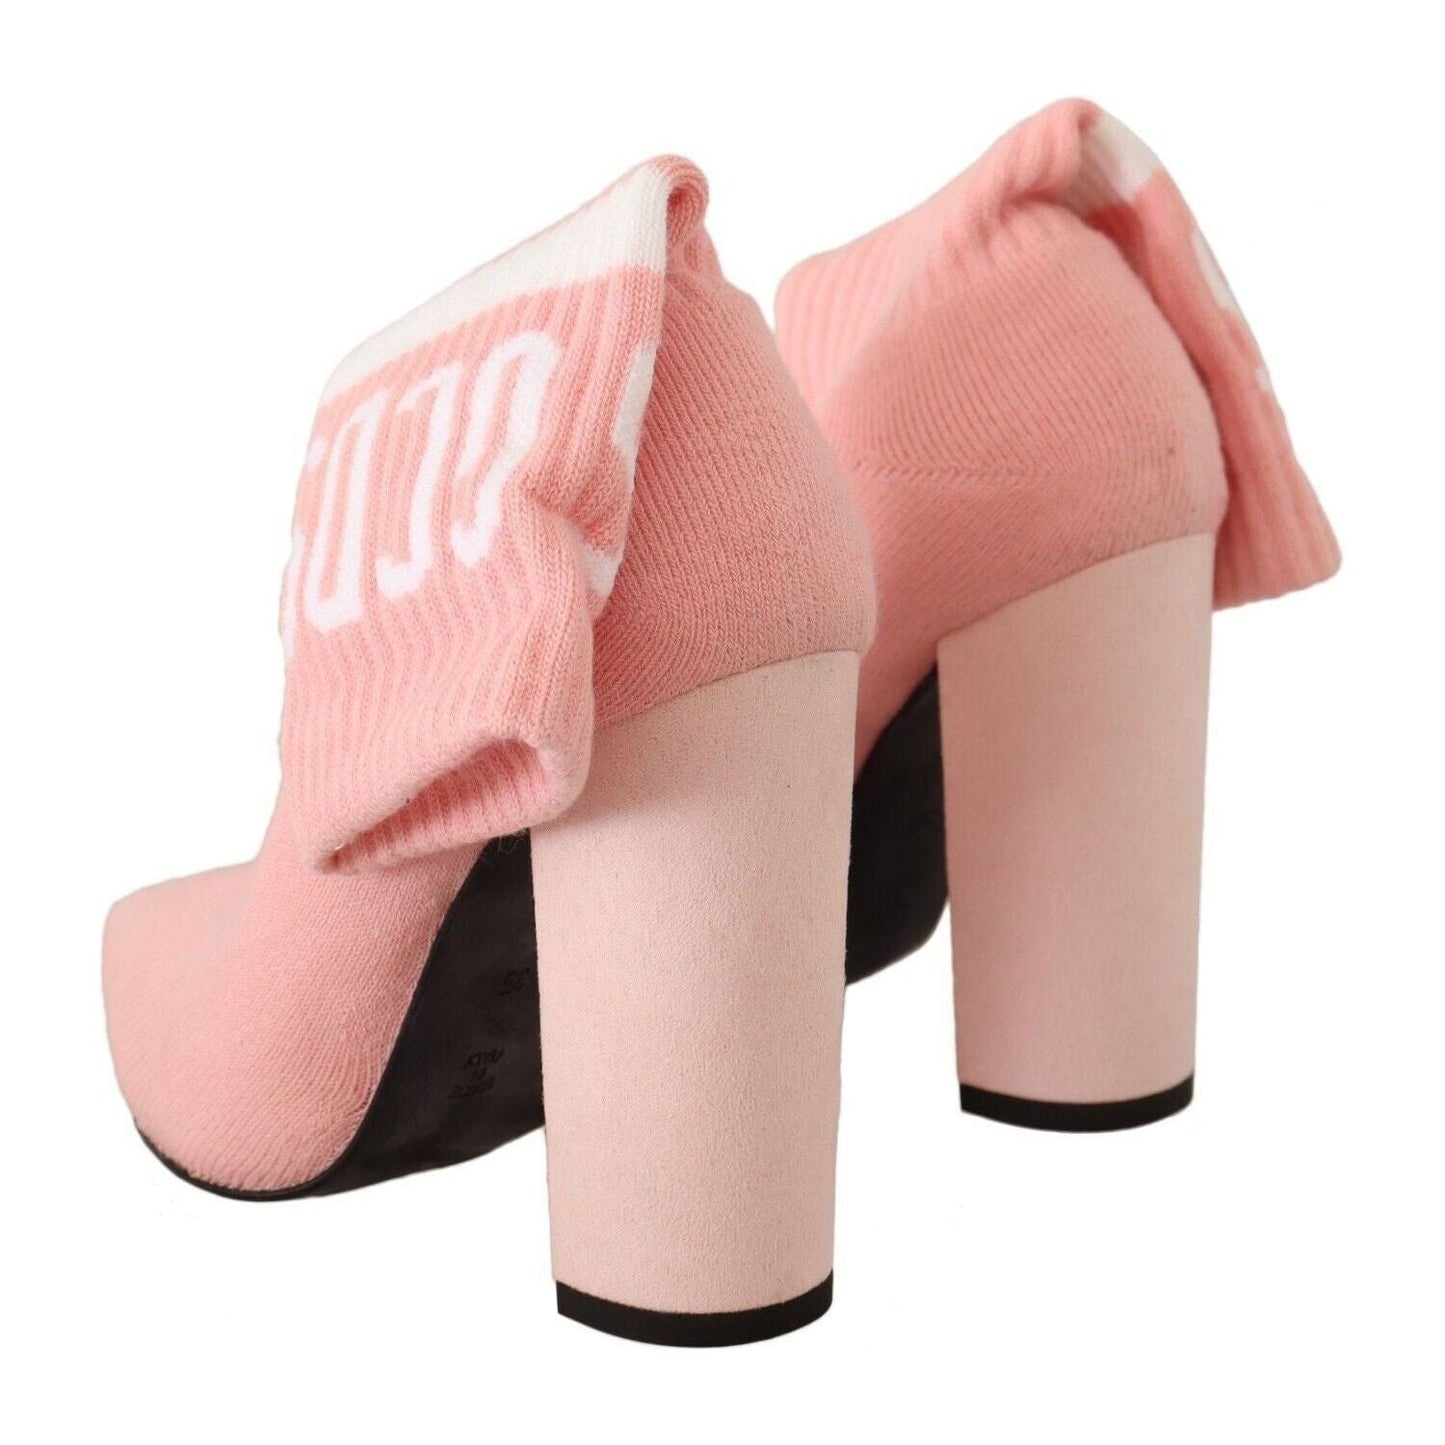 GCDS Chic Pink Suede Ankle Boots with Logo Socks pink-suede-logo-socks-block-heel-ankle-boots-shoes s-l1600-2-177-166d4cee-9a9.jpg